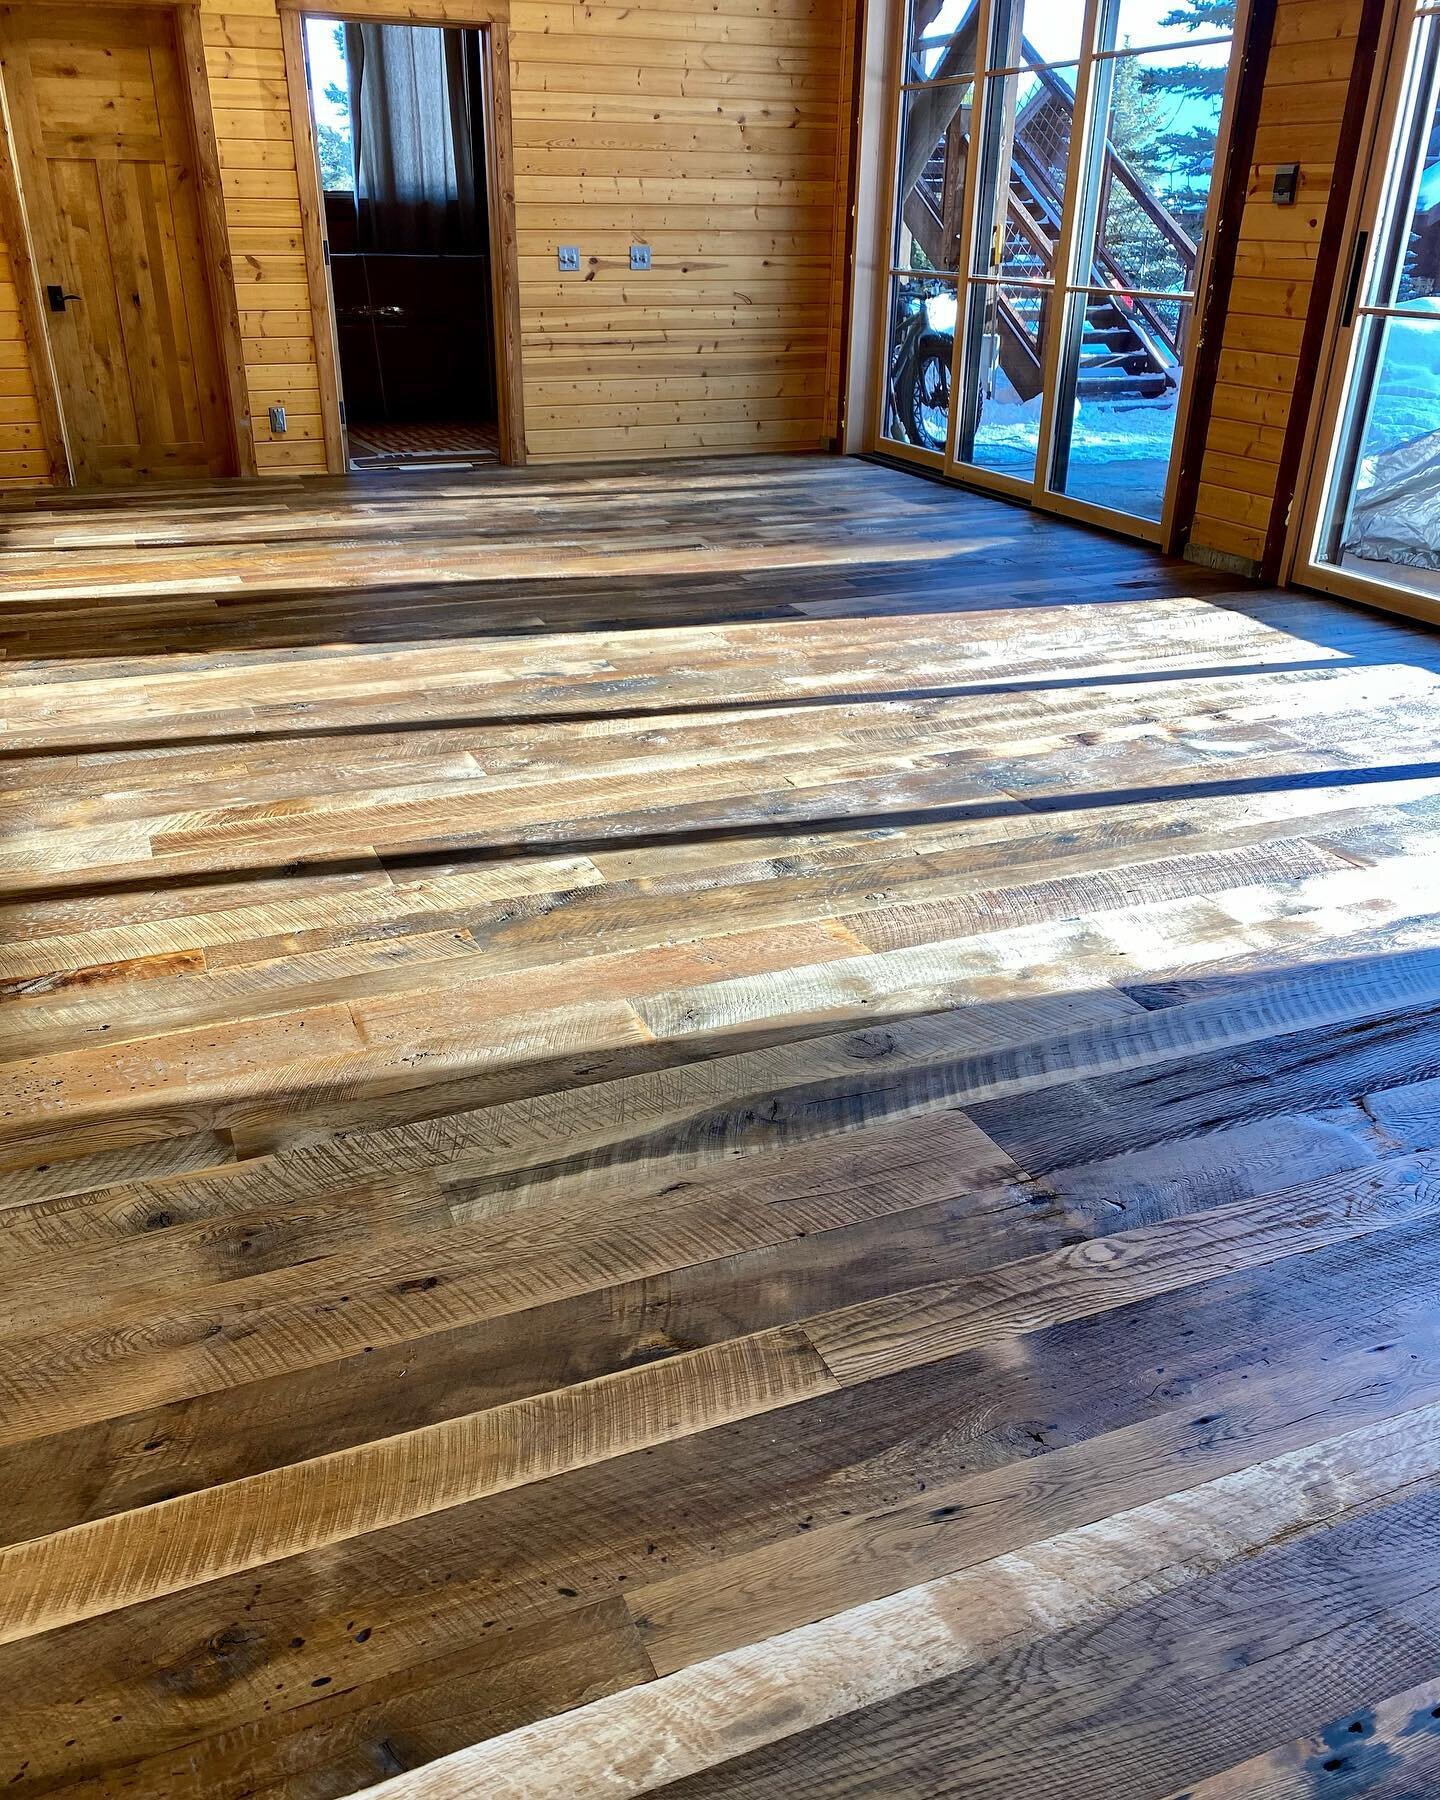 Sneak peek at our barn renovations! New HEATED floors, reclaimed solid oak. 2 new 10ft high multi slide doors to bring in the sunlight. 2,500 sq ft space will become our own personal saloon/art gallery complete with western bar. More to come! #barnre